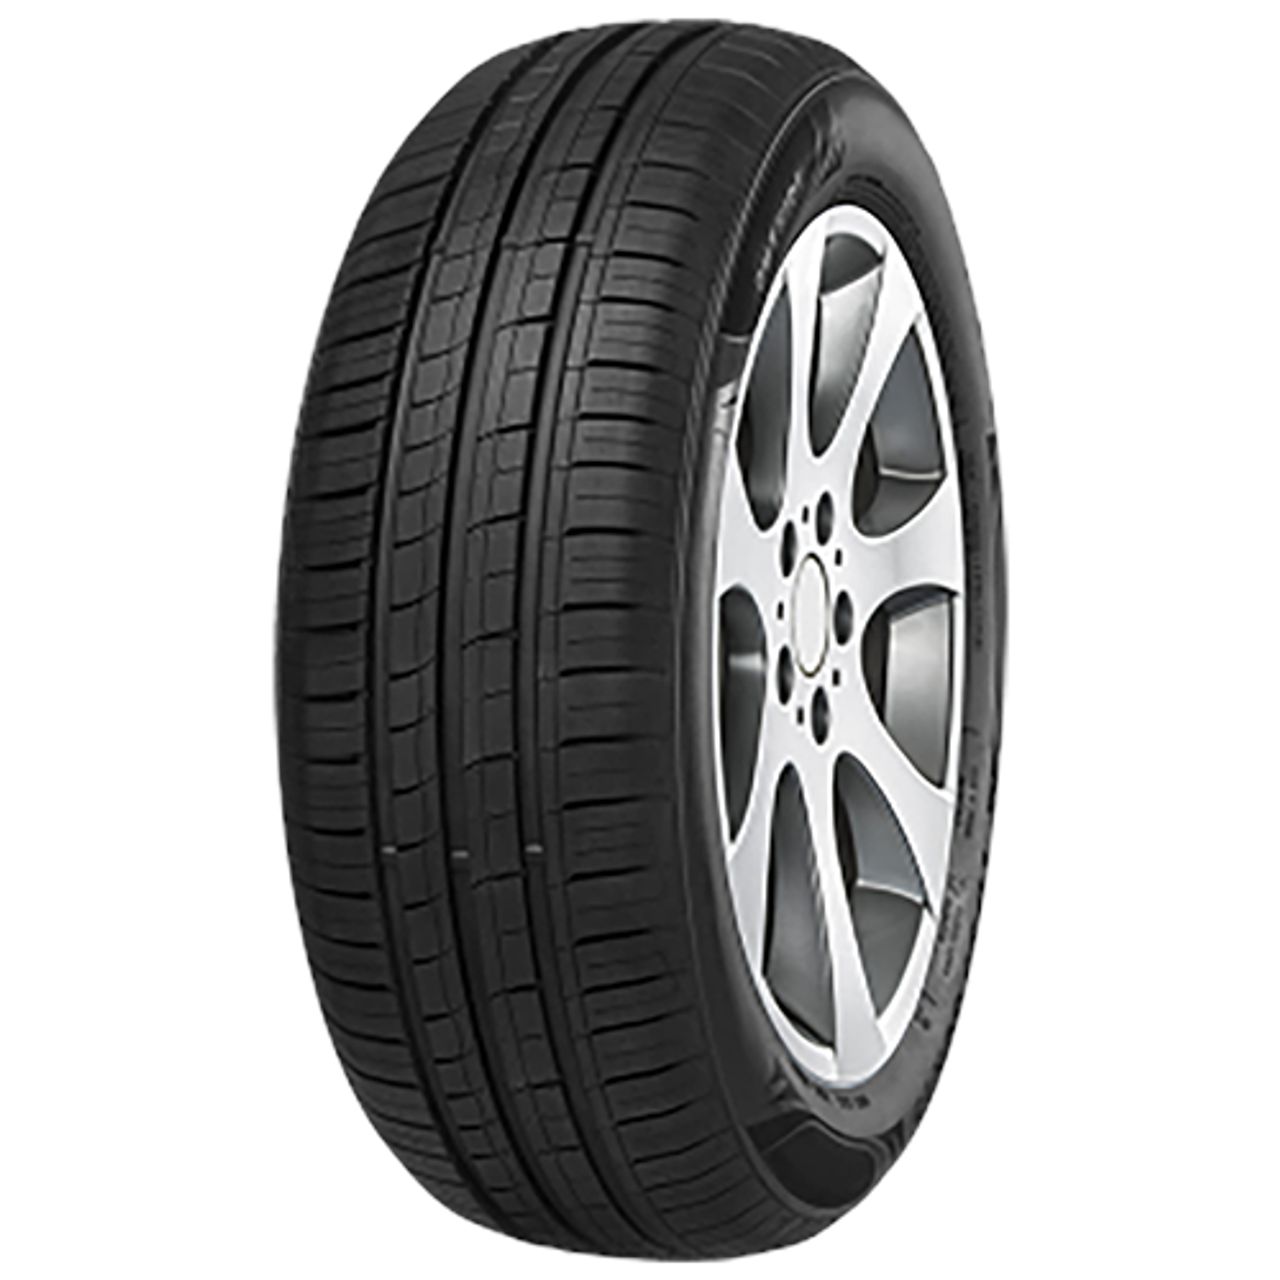 IMPERIAL ECODRIVER 4 175/65R15 84H BSW